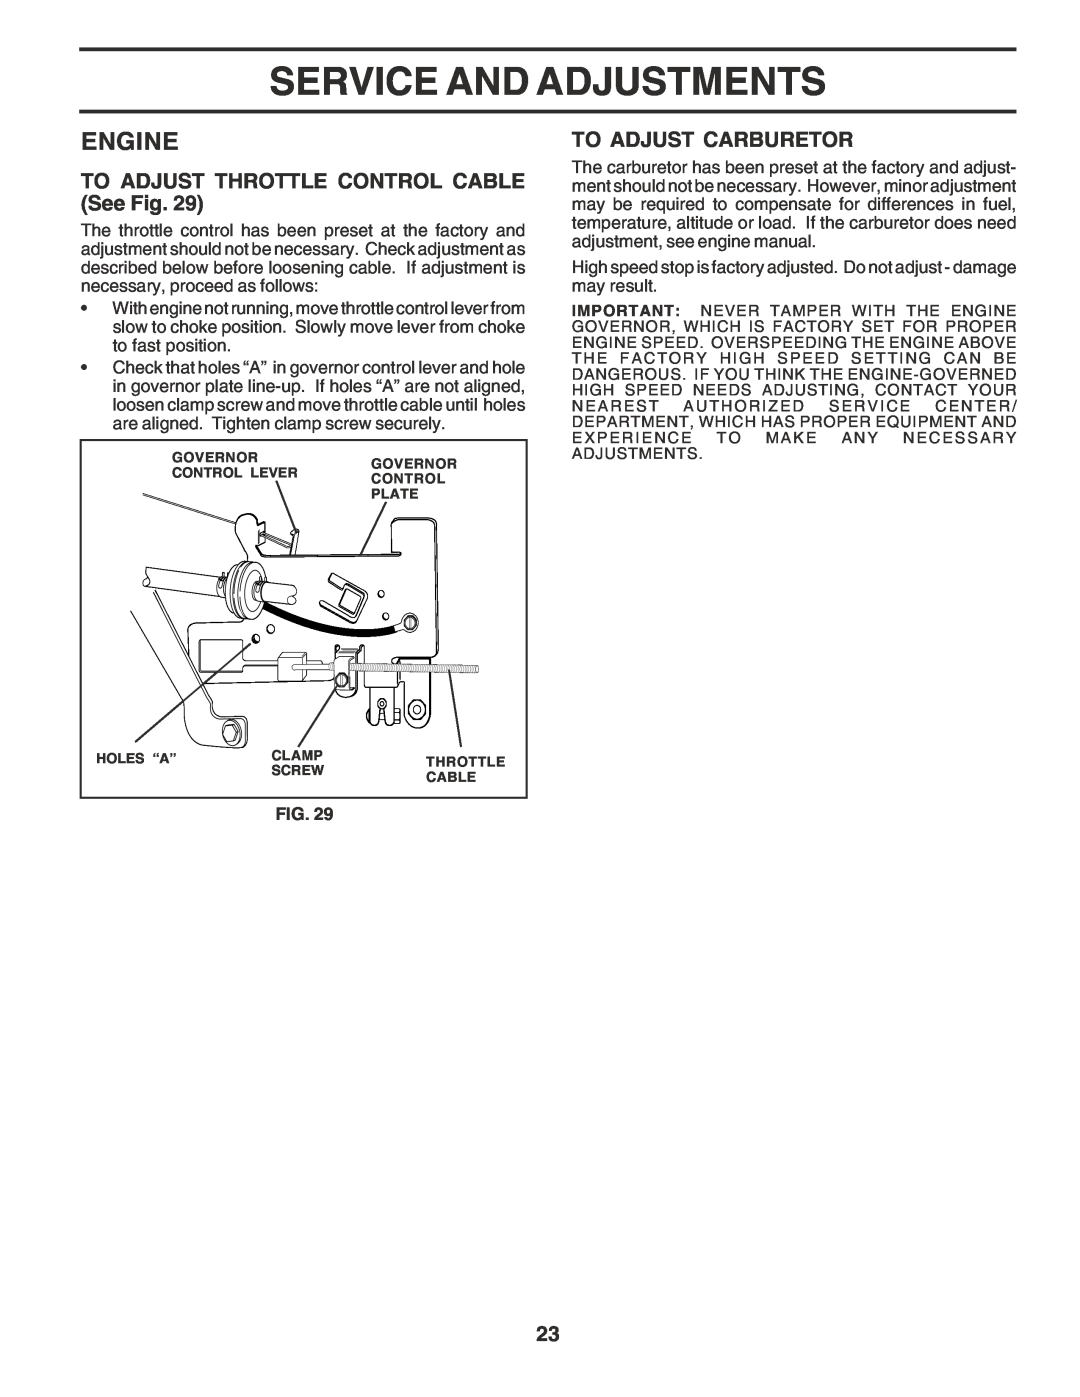 Poulan PO14542E manual TO ADJUST THROTTLE CONTROL CABLE See Fig, To Adjust Carburetor, Service And Adjustments, Engine 